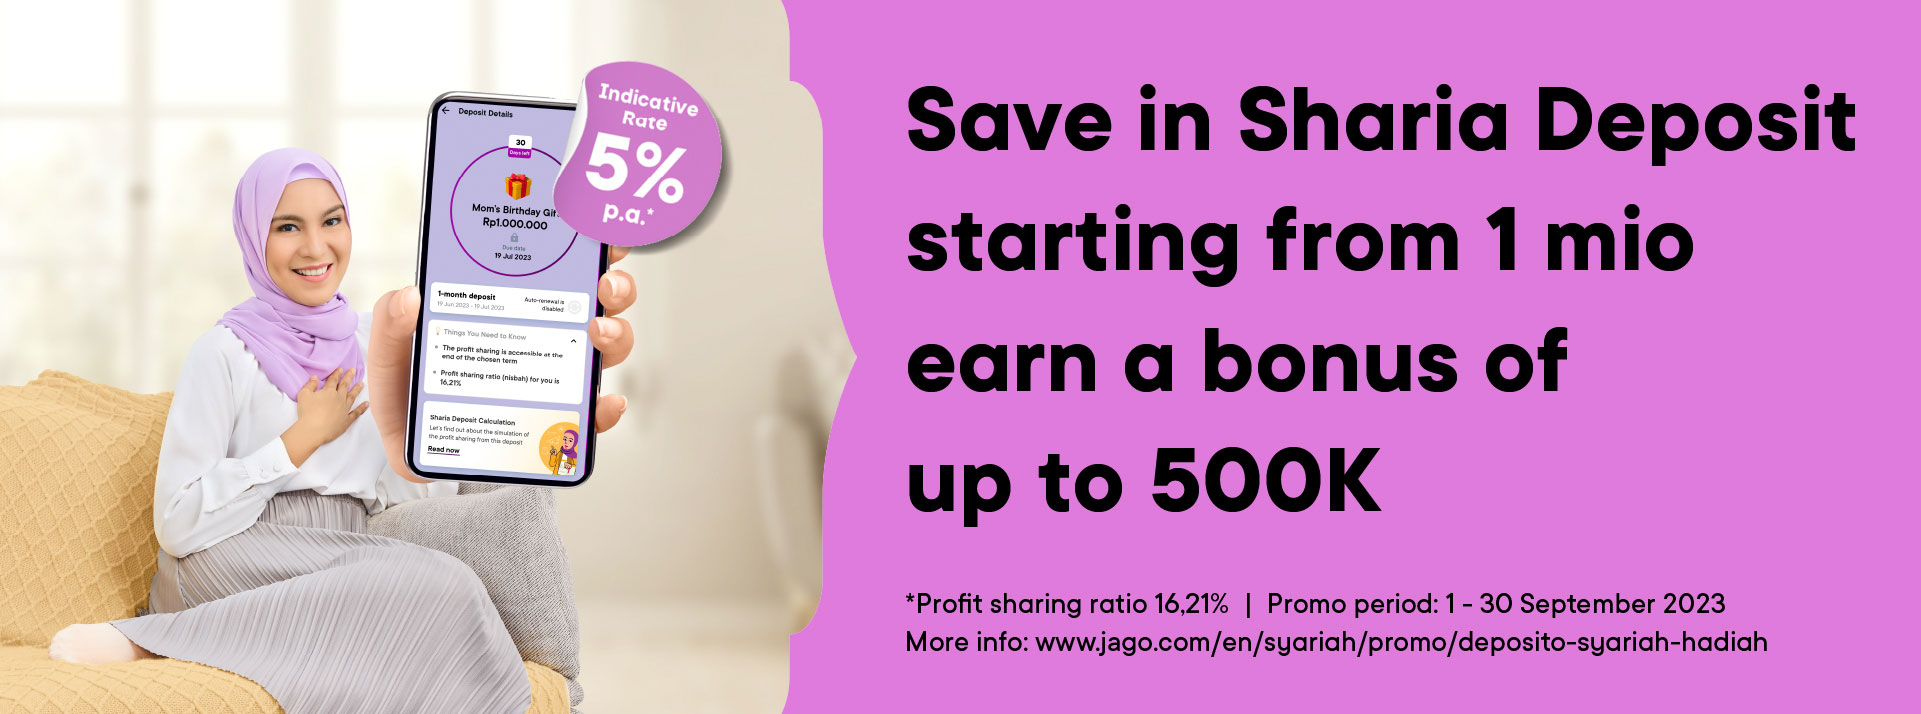 Save in Sharia Deposit starting from 1 mio earn a bonus up to 500K